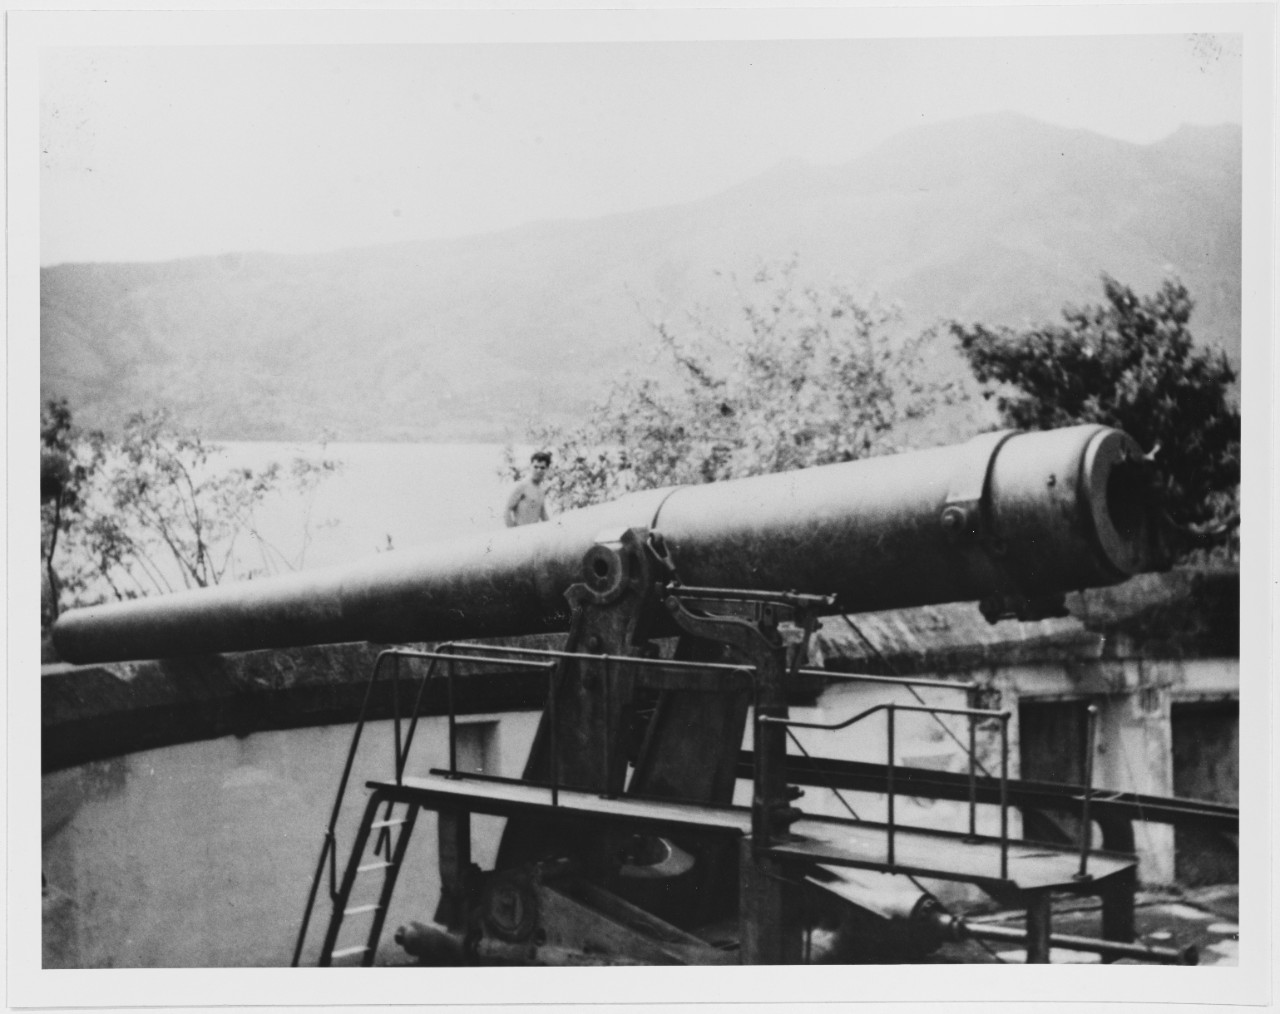 Ten-inch Coast Defense Gun at an abandoned U.S. Army Battery in Philippine Islands